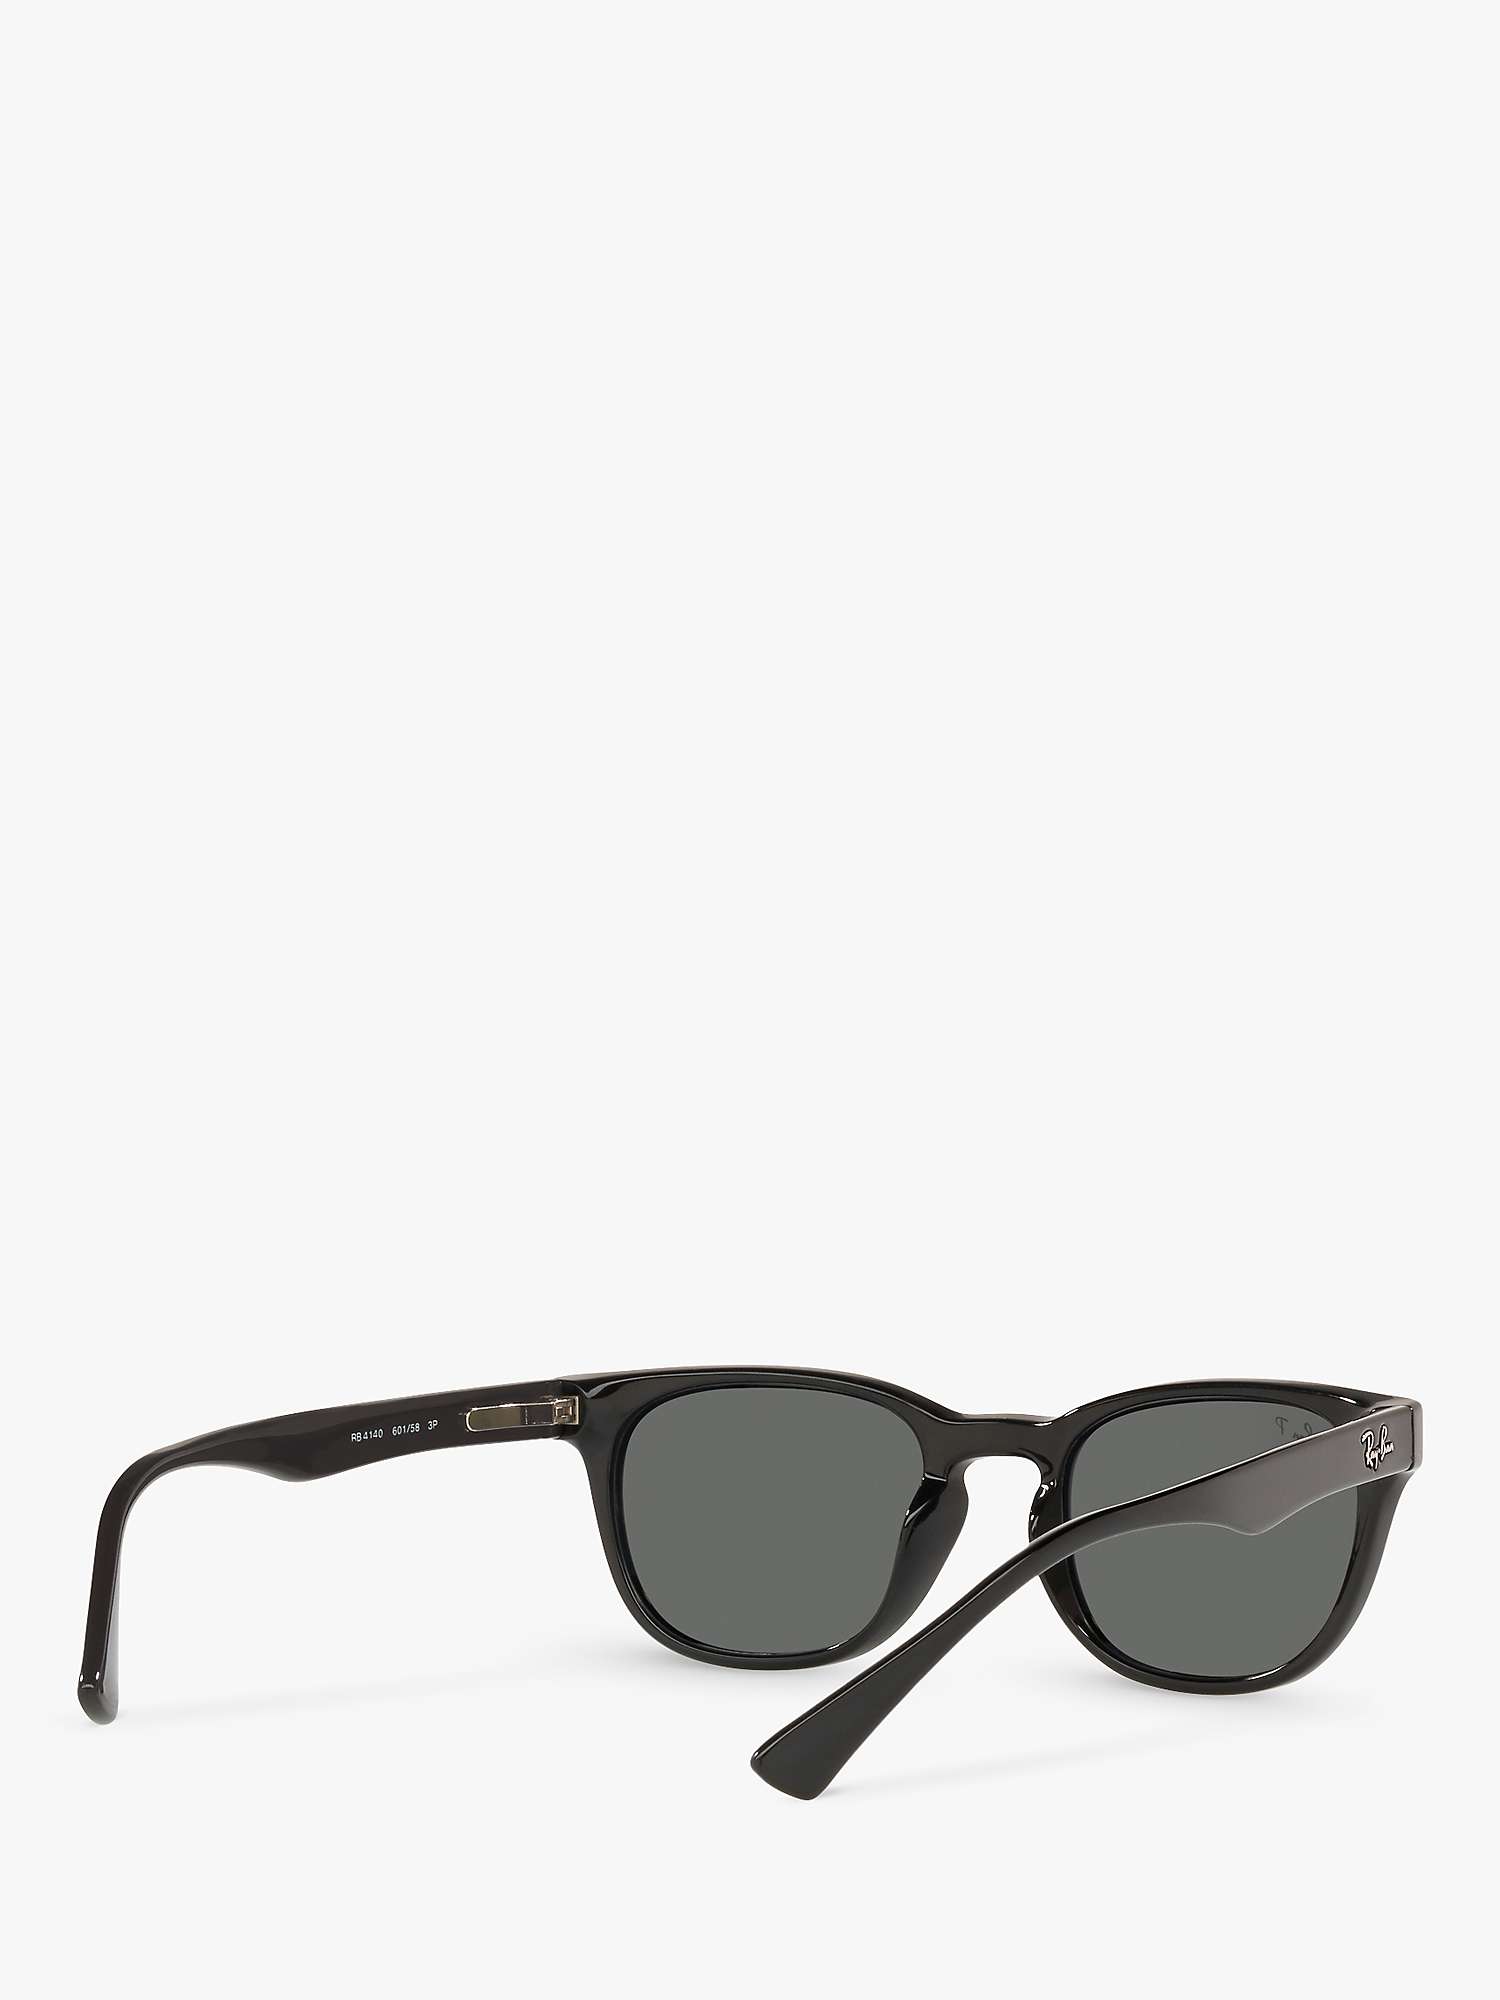 Buy Ray-Ban RB4140 Women's Polarised Square Sunglasses Online at johnlewis.com